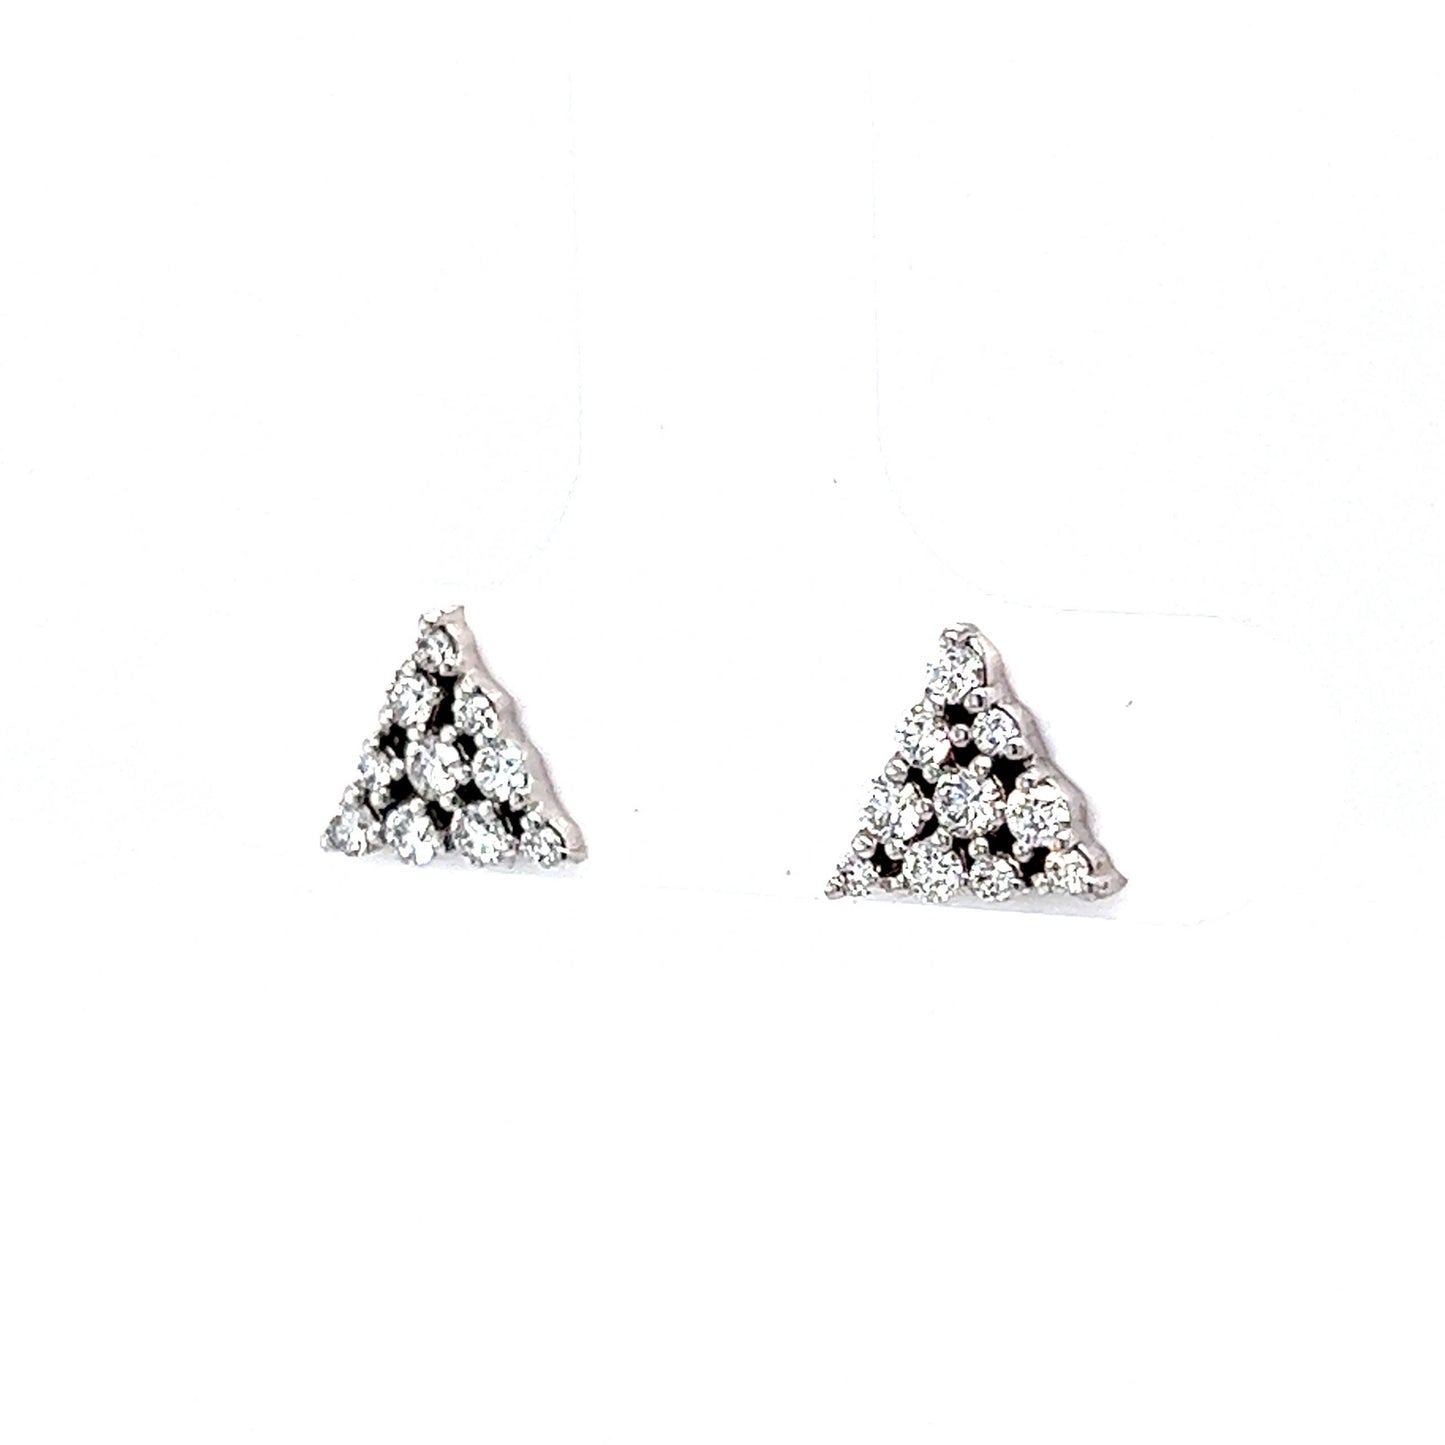 Pave Diamond Triangle Stud Earrings in 18k White Gold